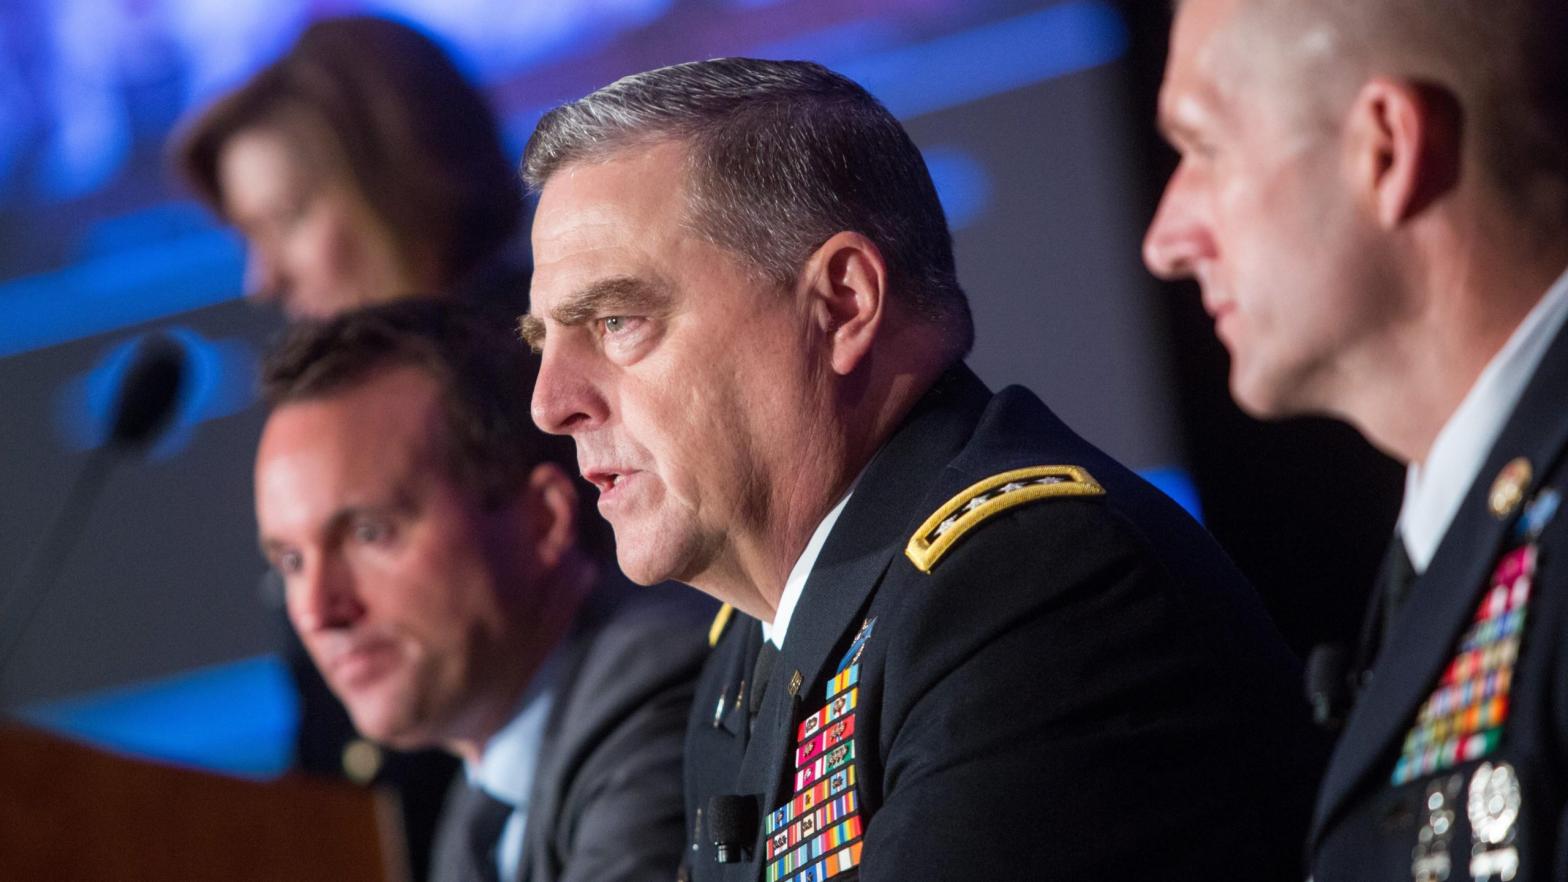 General Mark Milley, then the Army Chief of Staff, as seen at an Association of U.S. Army Annual Meeting in October 2016 in Washington, DC. (Photo: Allison Shelley, Getty Images)